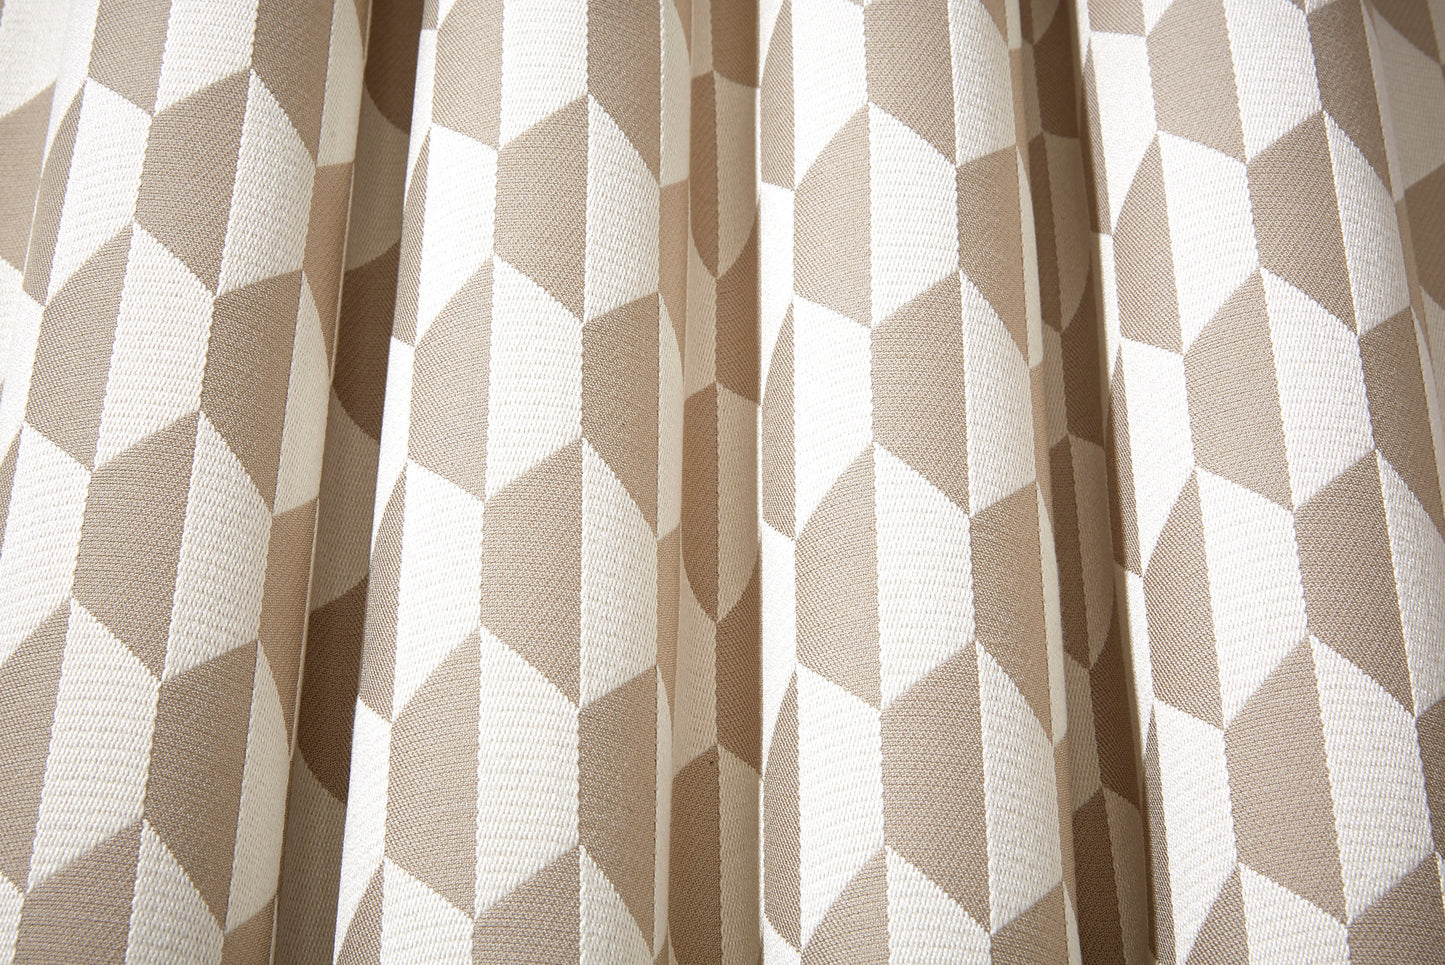 Tile Fabric F111/9033 By Cole & Son